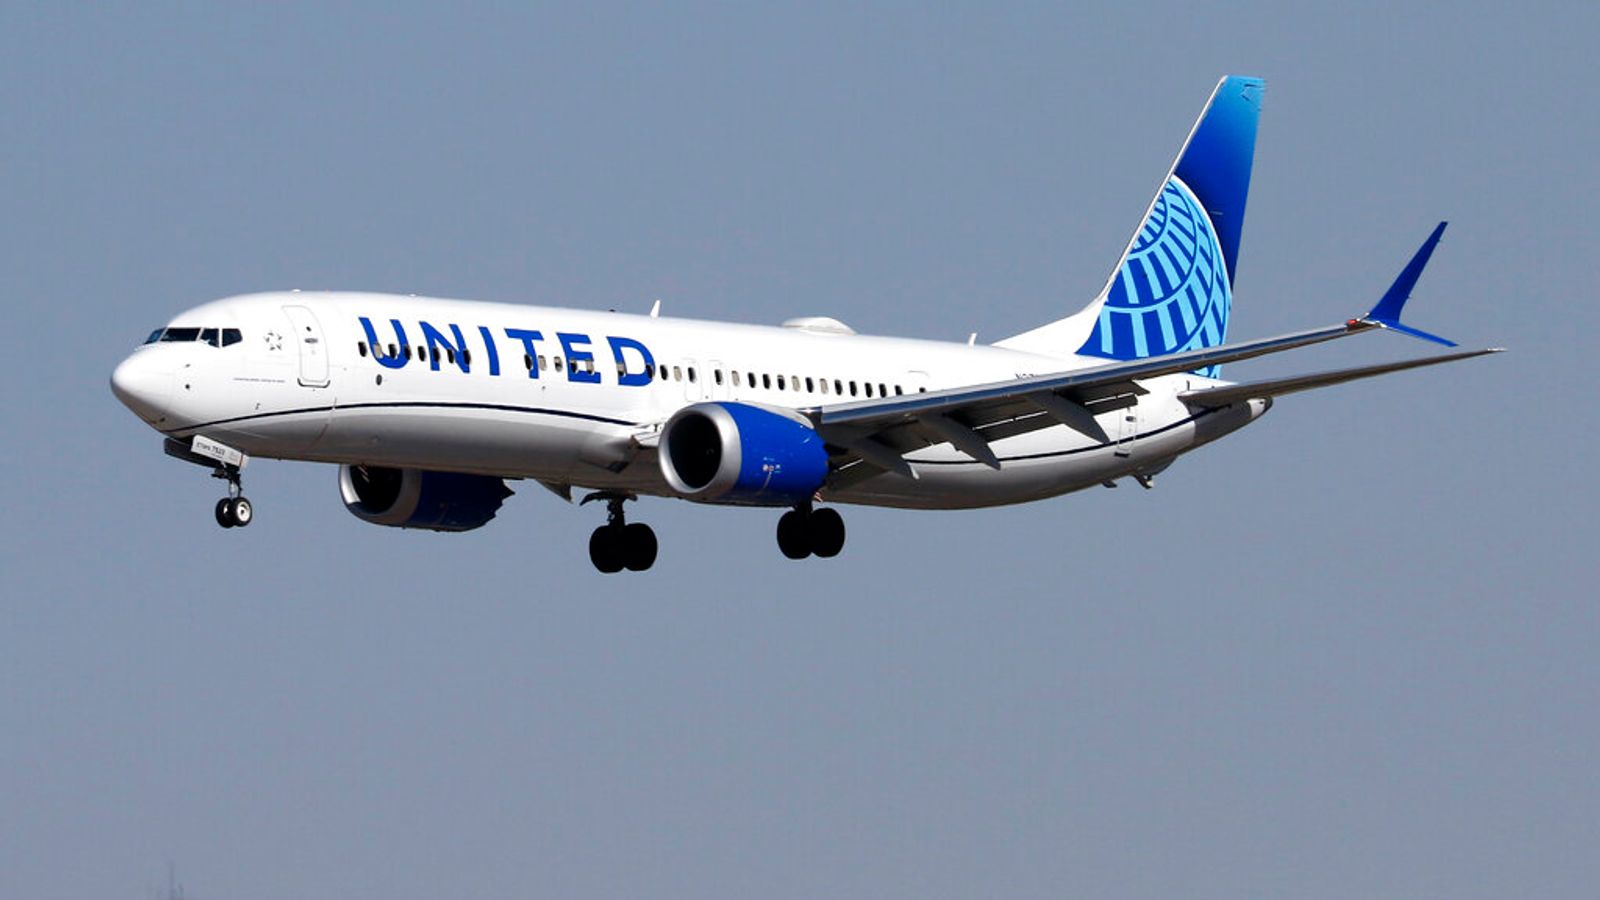 United Airlines finds problems with doors on 737 Max 9 aircraft - days after plane's mid-air blowout